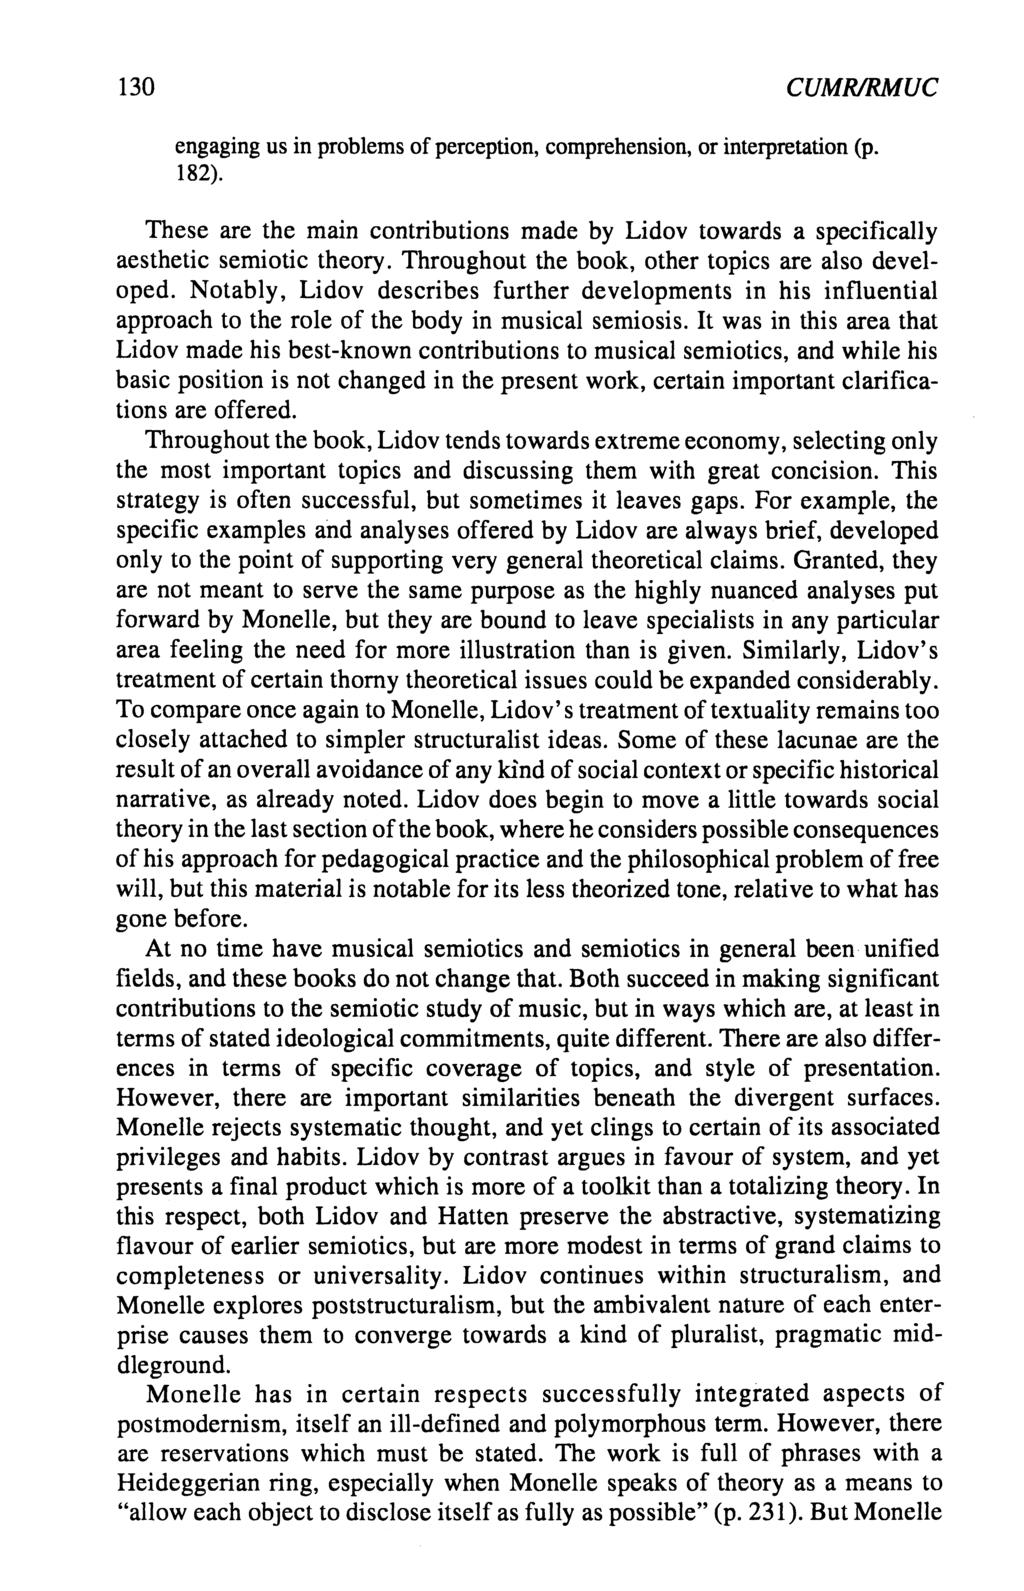 130 CUMRmMUC engaging us in problems of perception, comprehension, or interpretation (p. 182). These are the main contributions made by Lidov towards a specifically aesthetic semiotic theory.